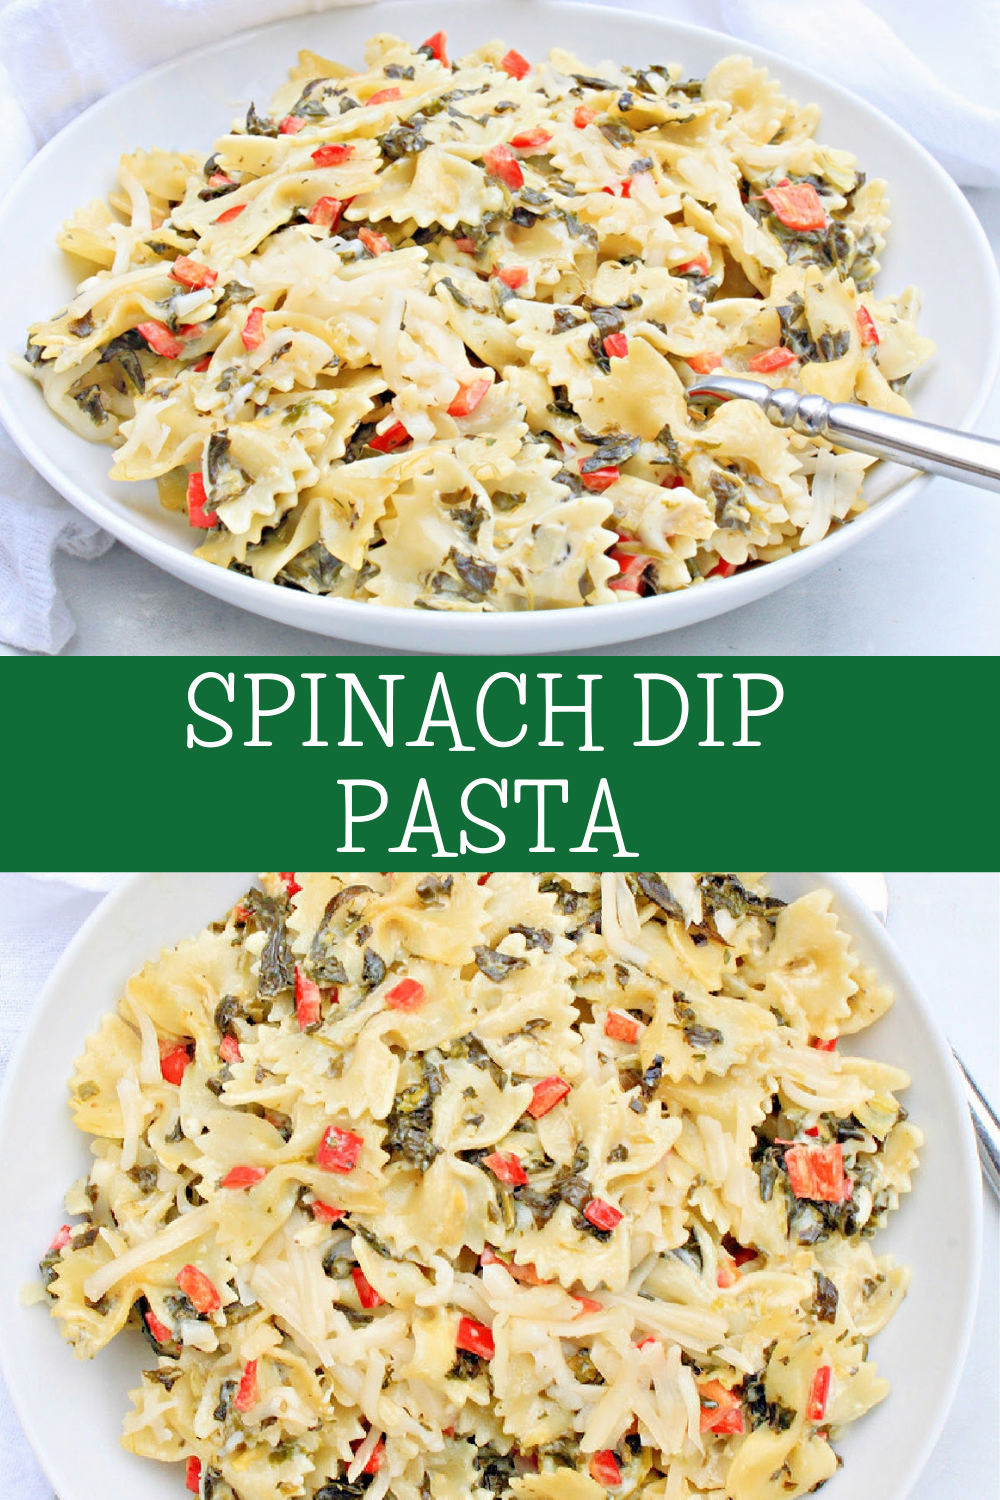 Spinach Dip Pasta ~ All the spinach dip flavor you love in an easy pasta bake. Perfect for turning leftover spinach dip into a whole new meal! via @thiswifecooks